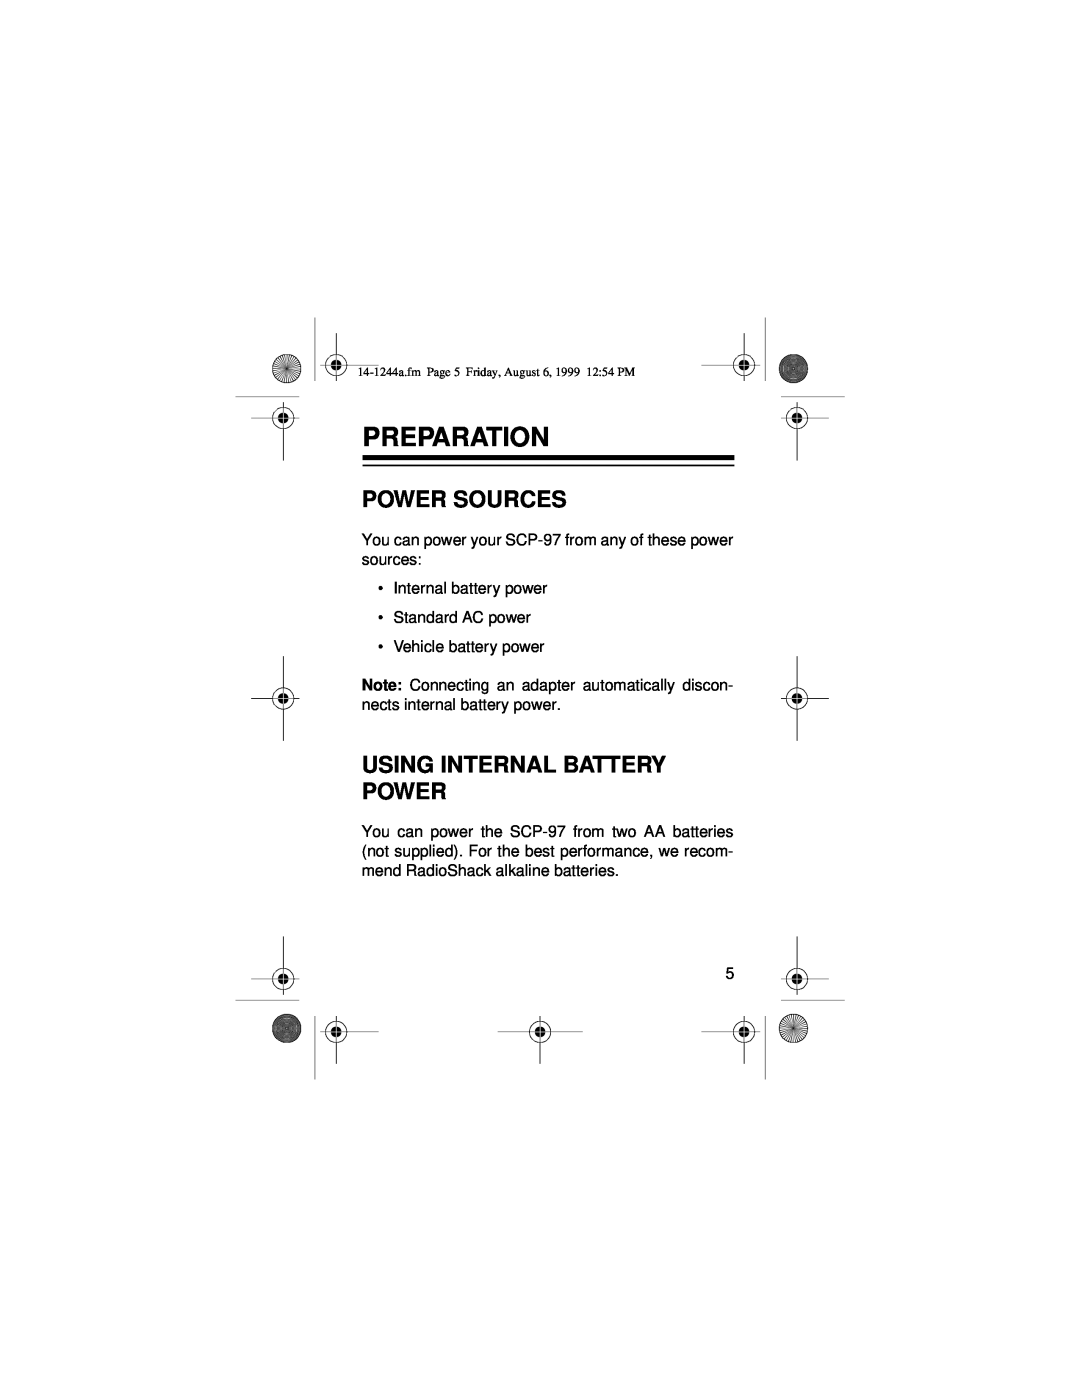 Optimus SCP-97 owner manual Preparation, Power Sources, Using Internal Battery Power 